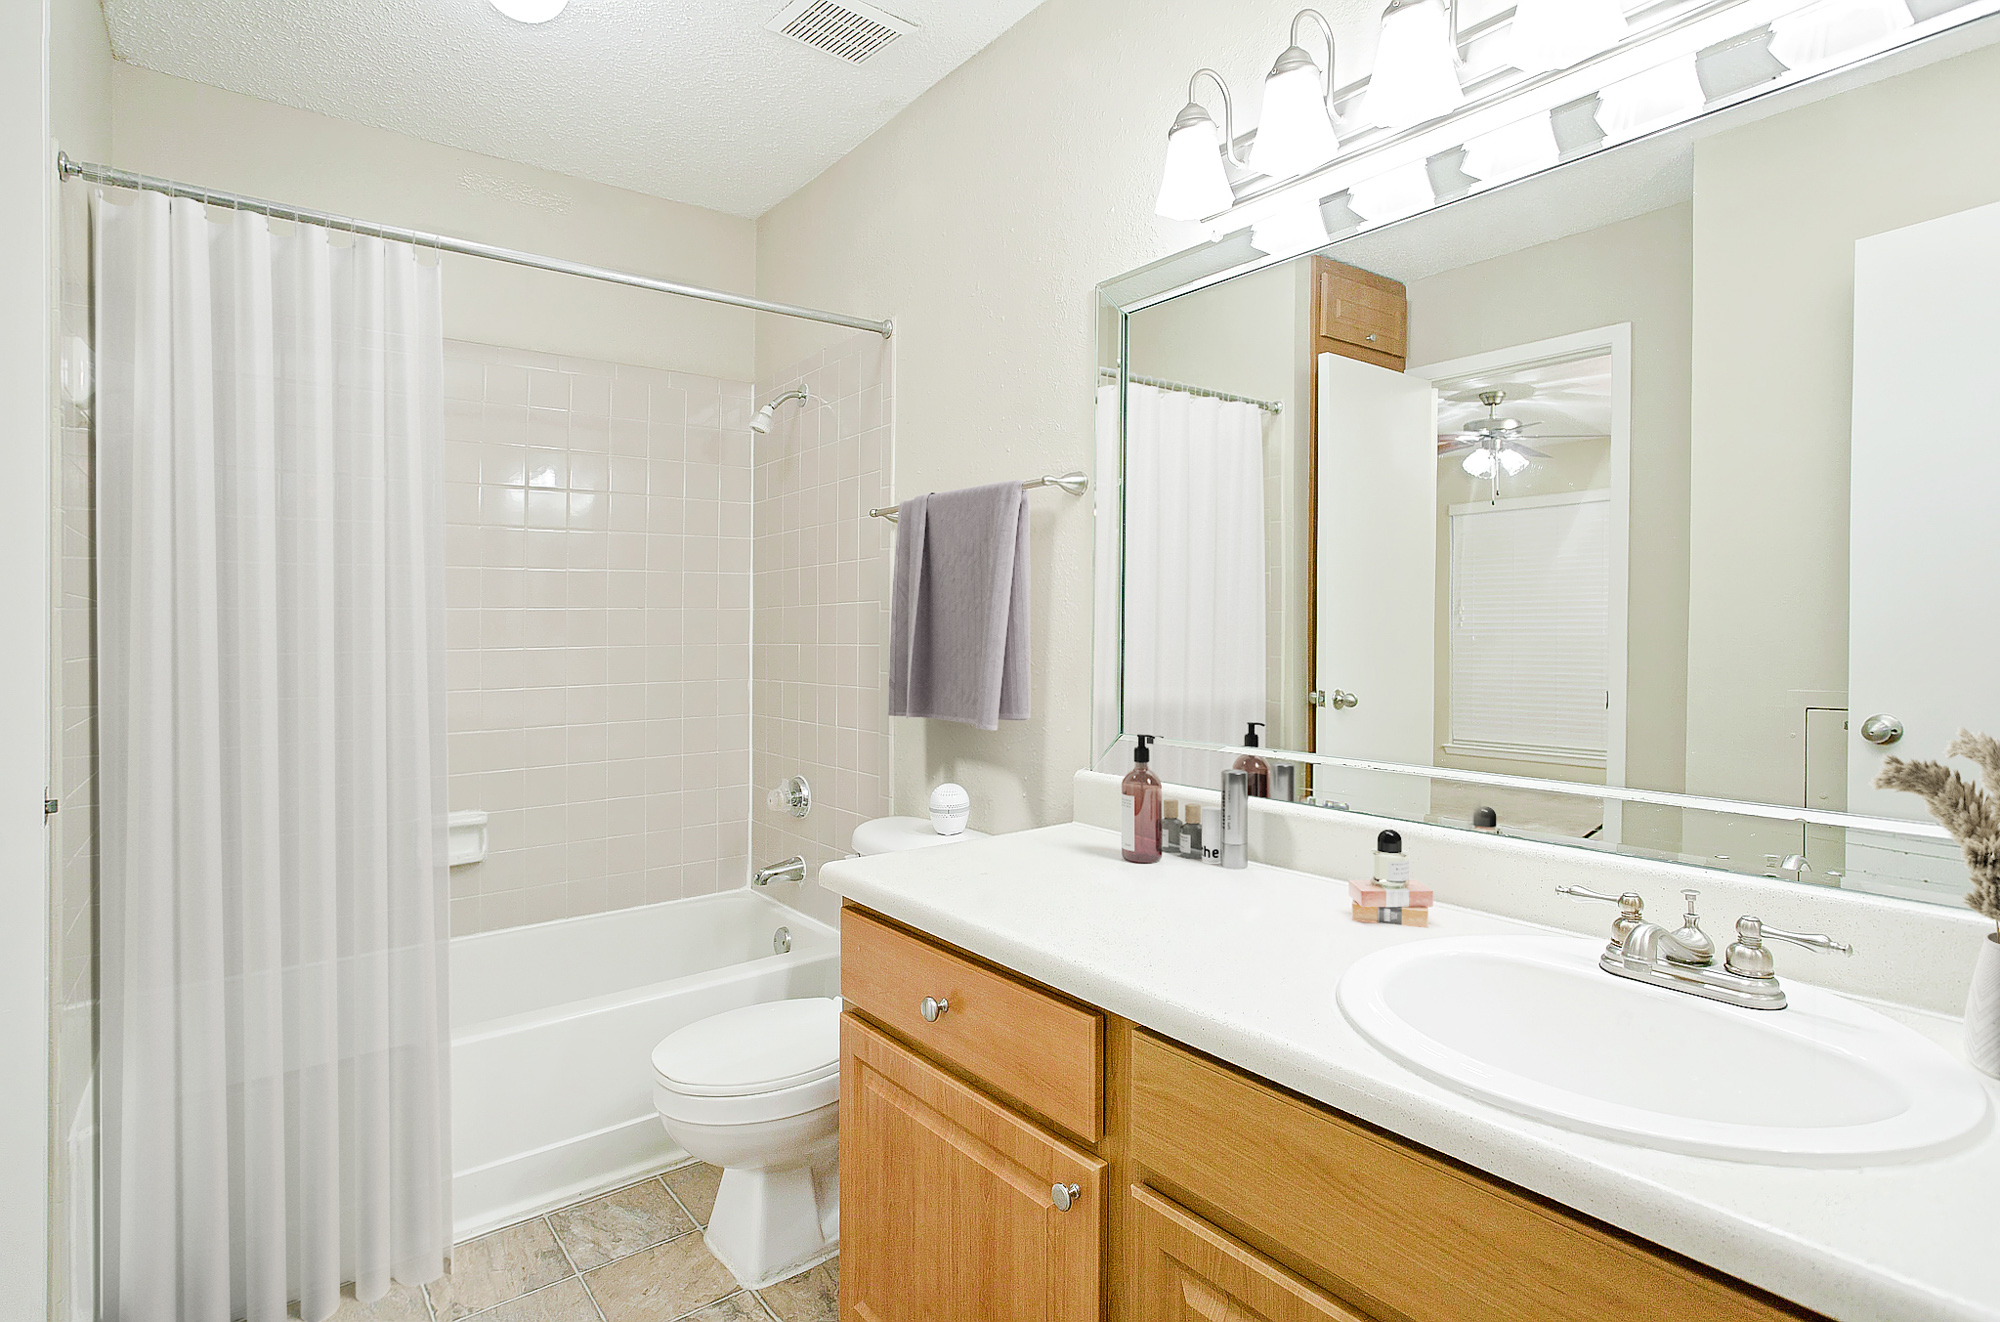 The bathroom of an apartment at The Arbors of Wells Branch in Austin, TX.